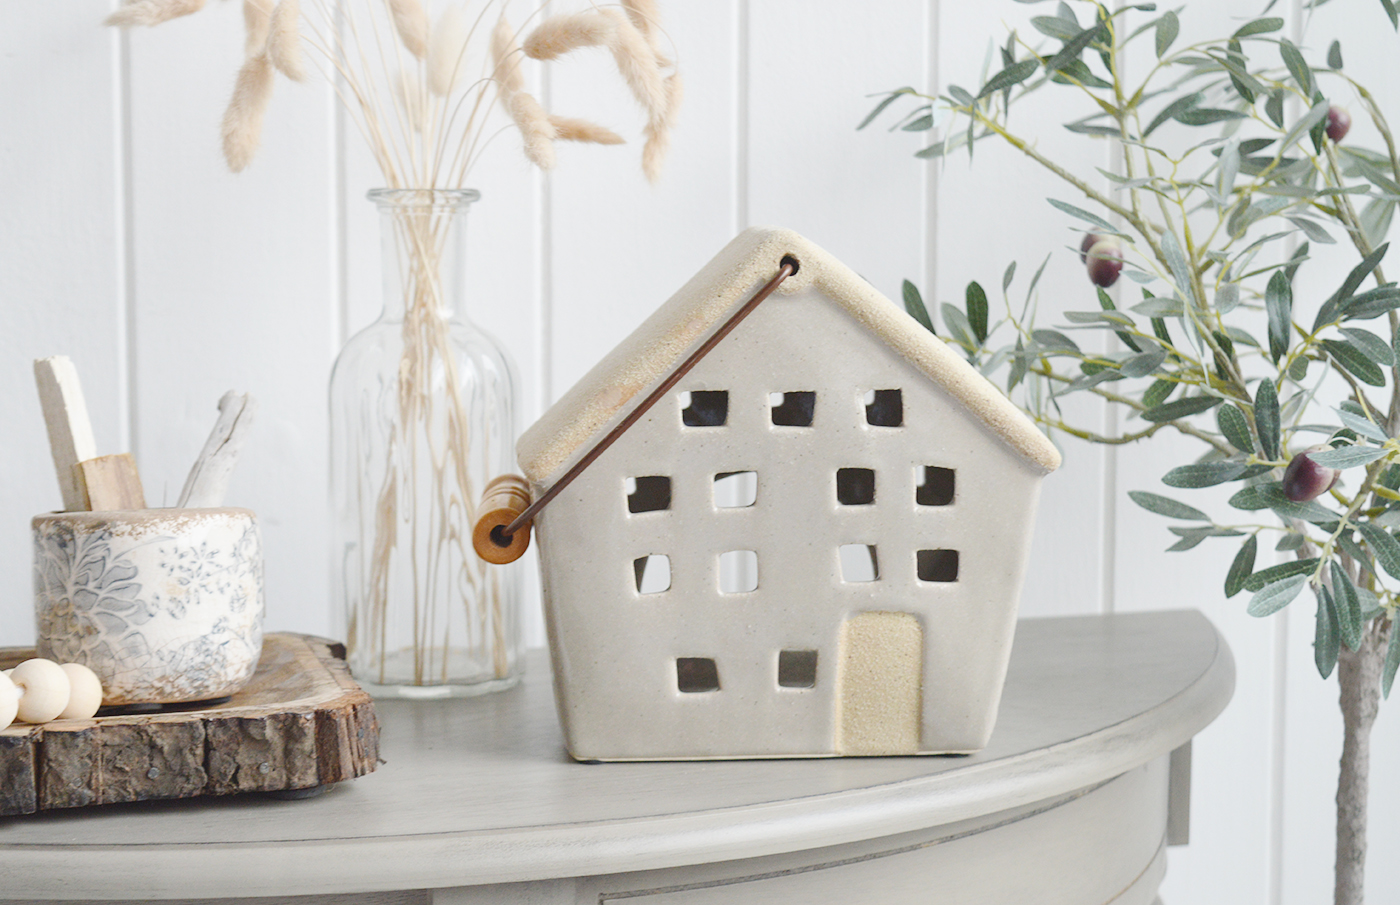 Town House Candle holder - The White Lighthouse Coastal New England Home Decor